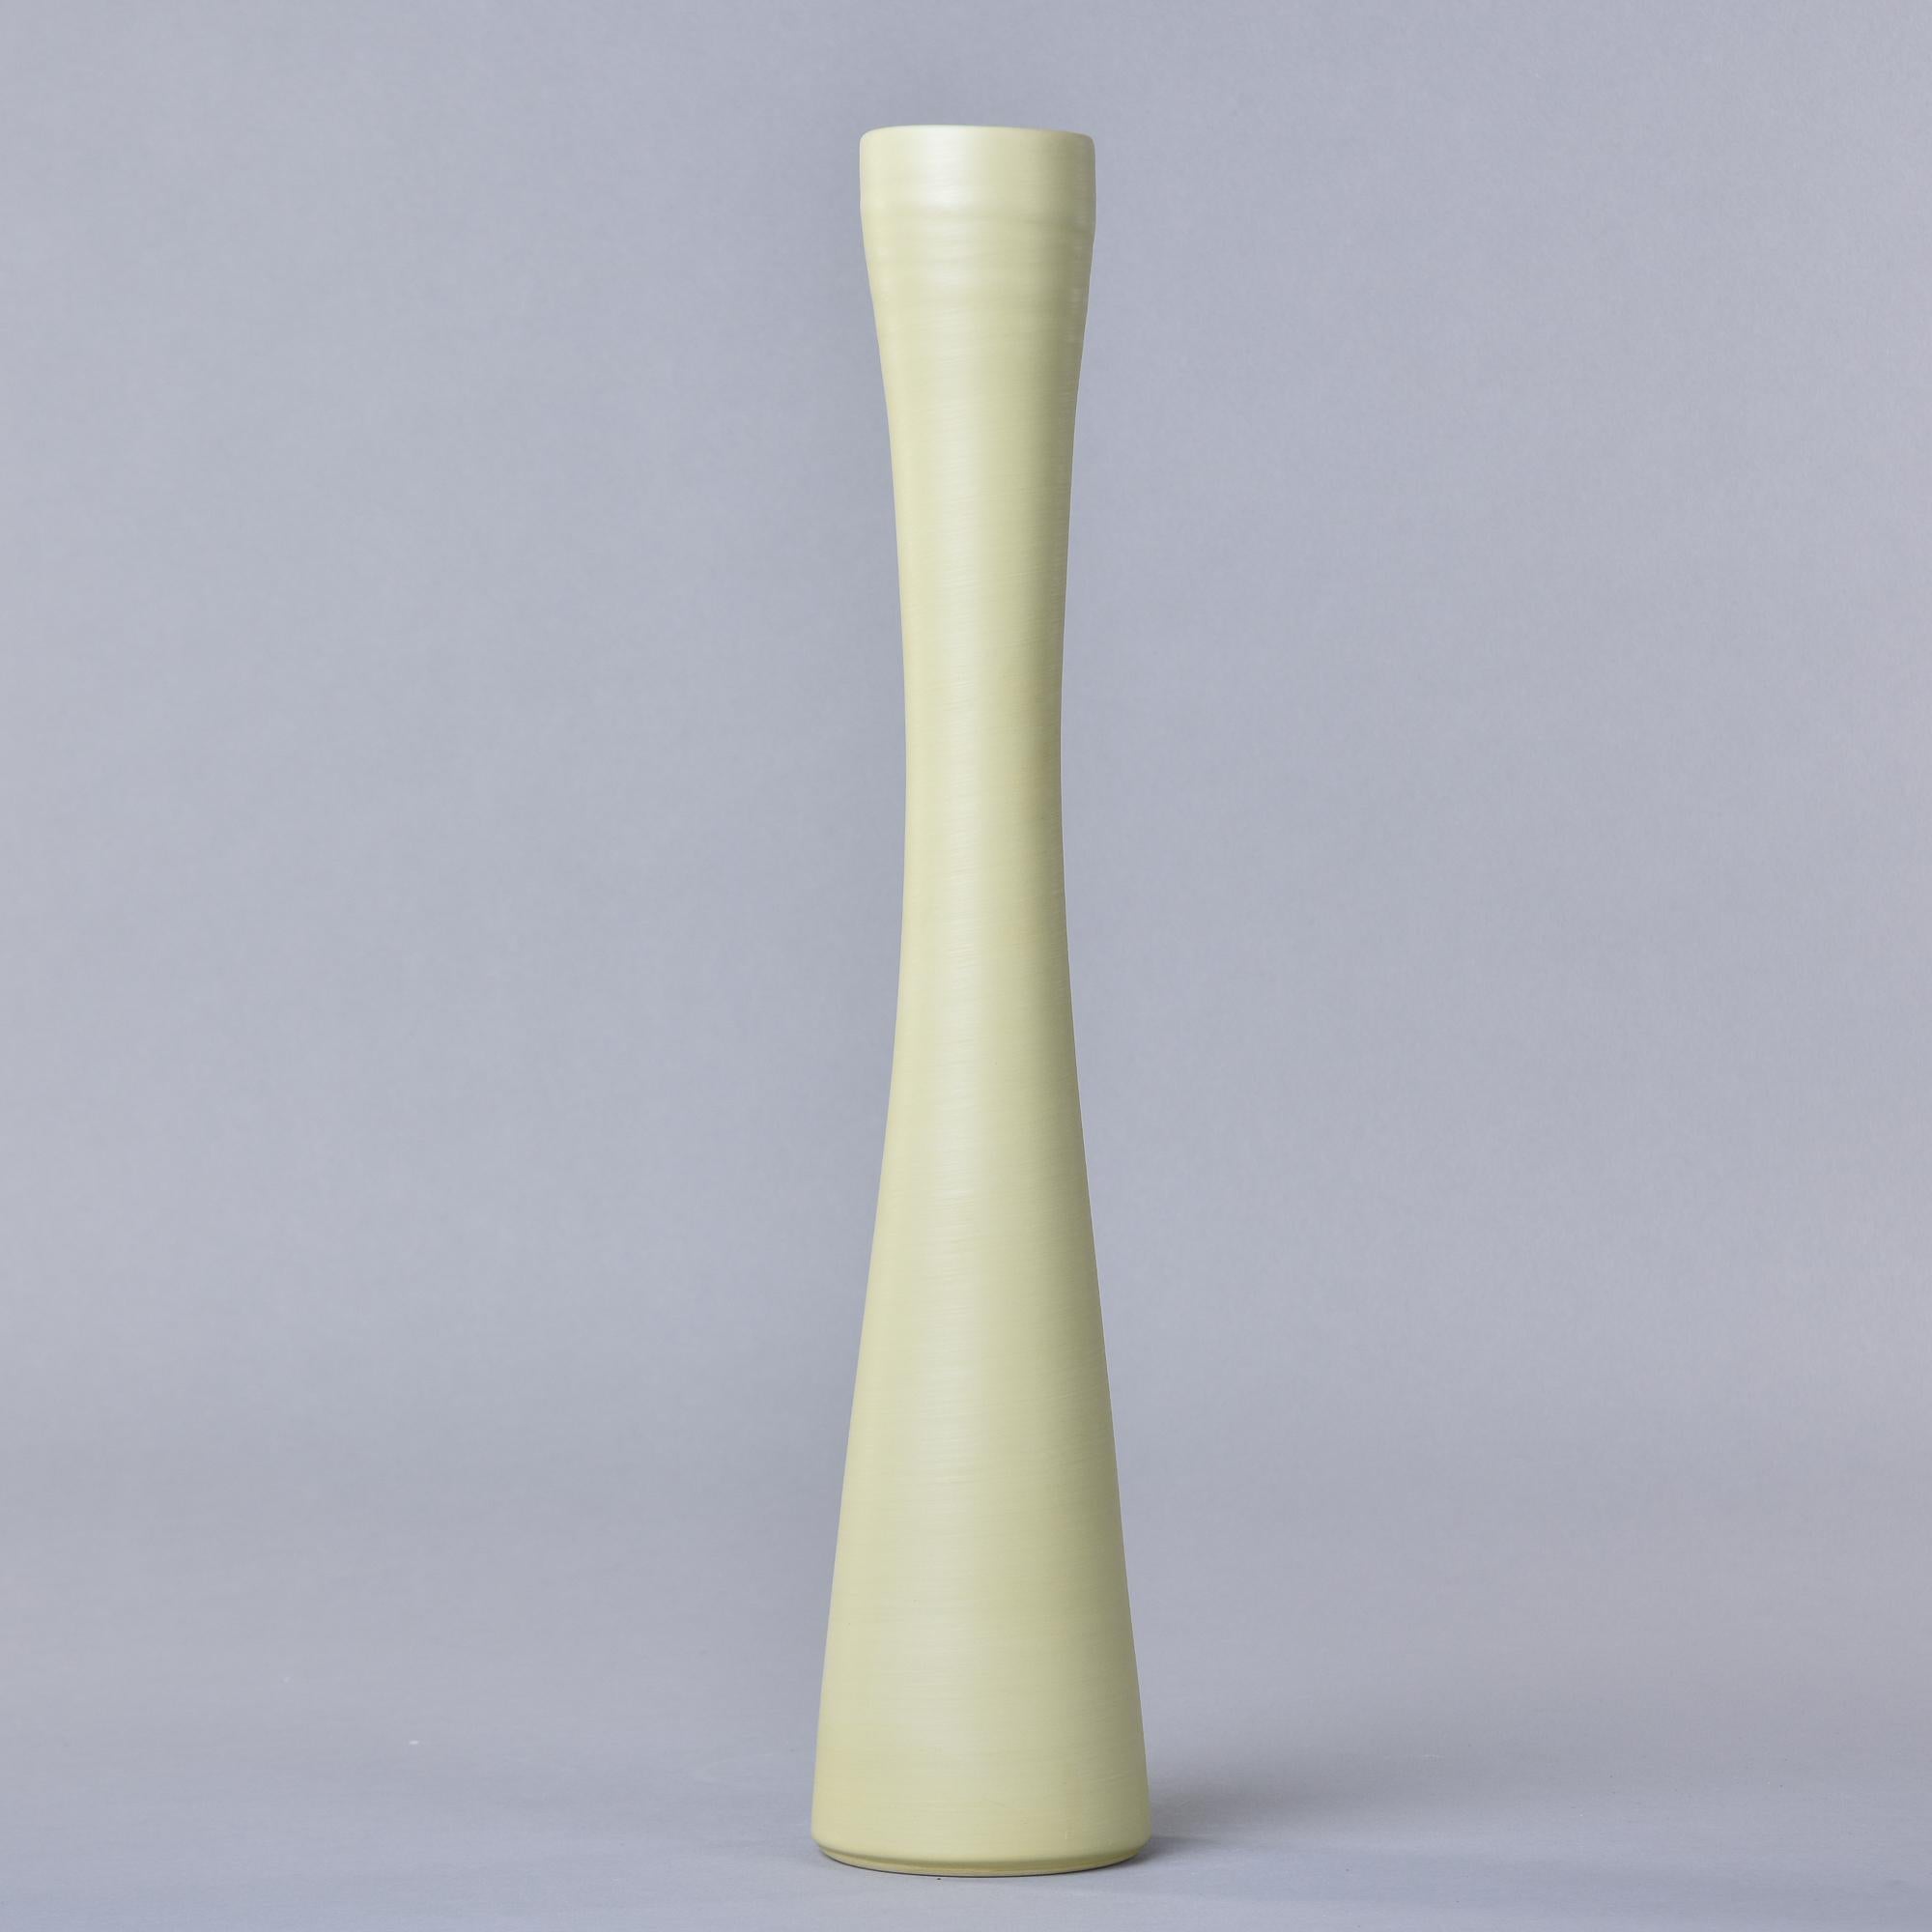 New and made in Italy by Rina Menardi, this tall slender vase is 18” high and has a pale pistachio green colored glaze. Rina Menardi calls this shade of green Pistachio. The inside of the vase has a contrasting soft black wash glaze. Other colors